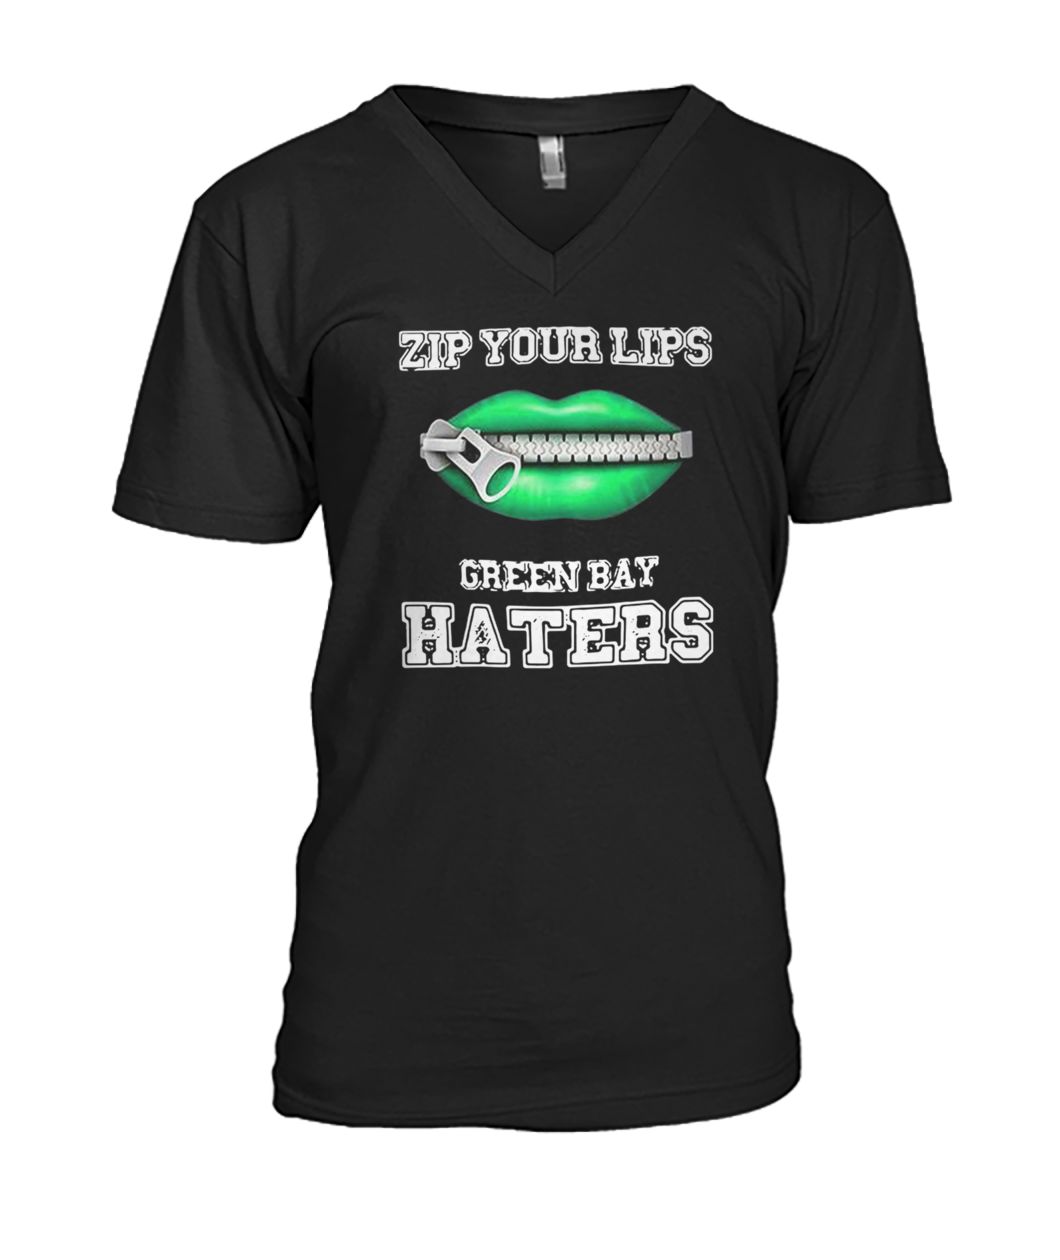 Zip your lips green bay packers haters mens v-neck